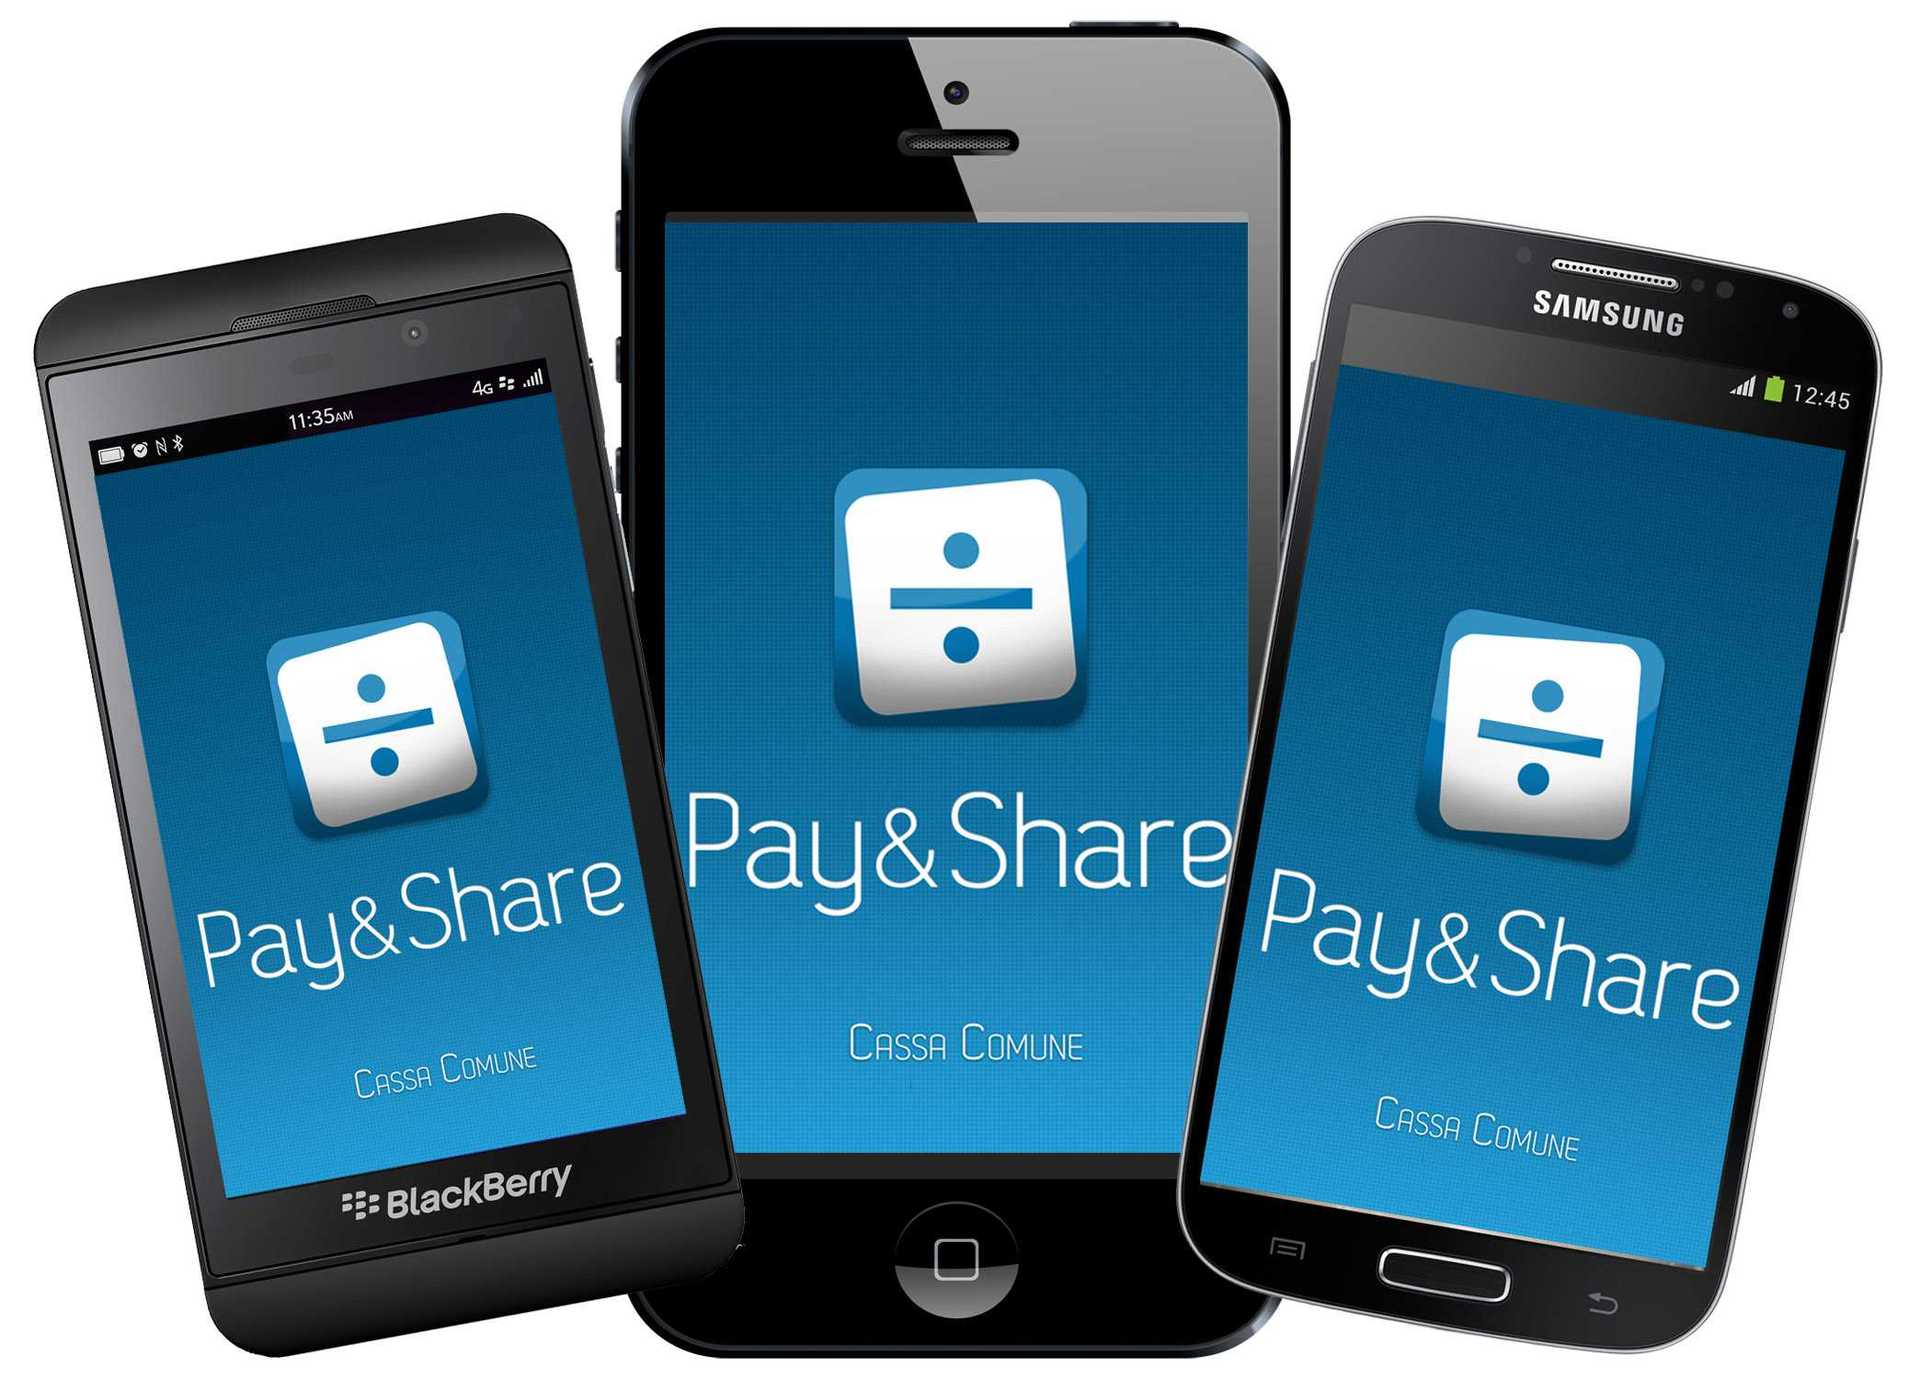 Pay&Share